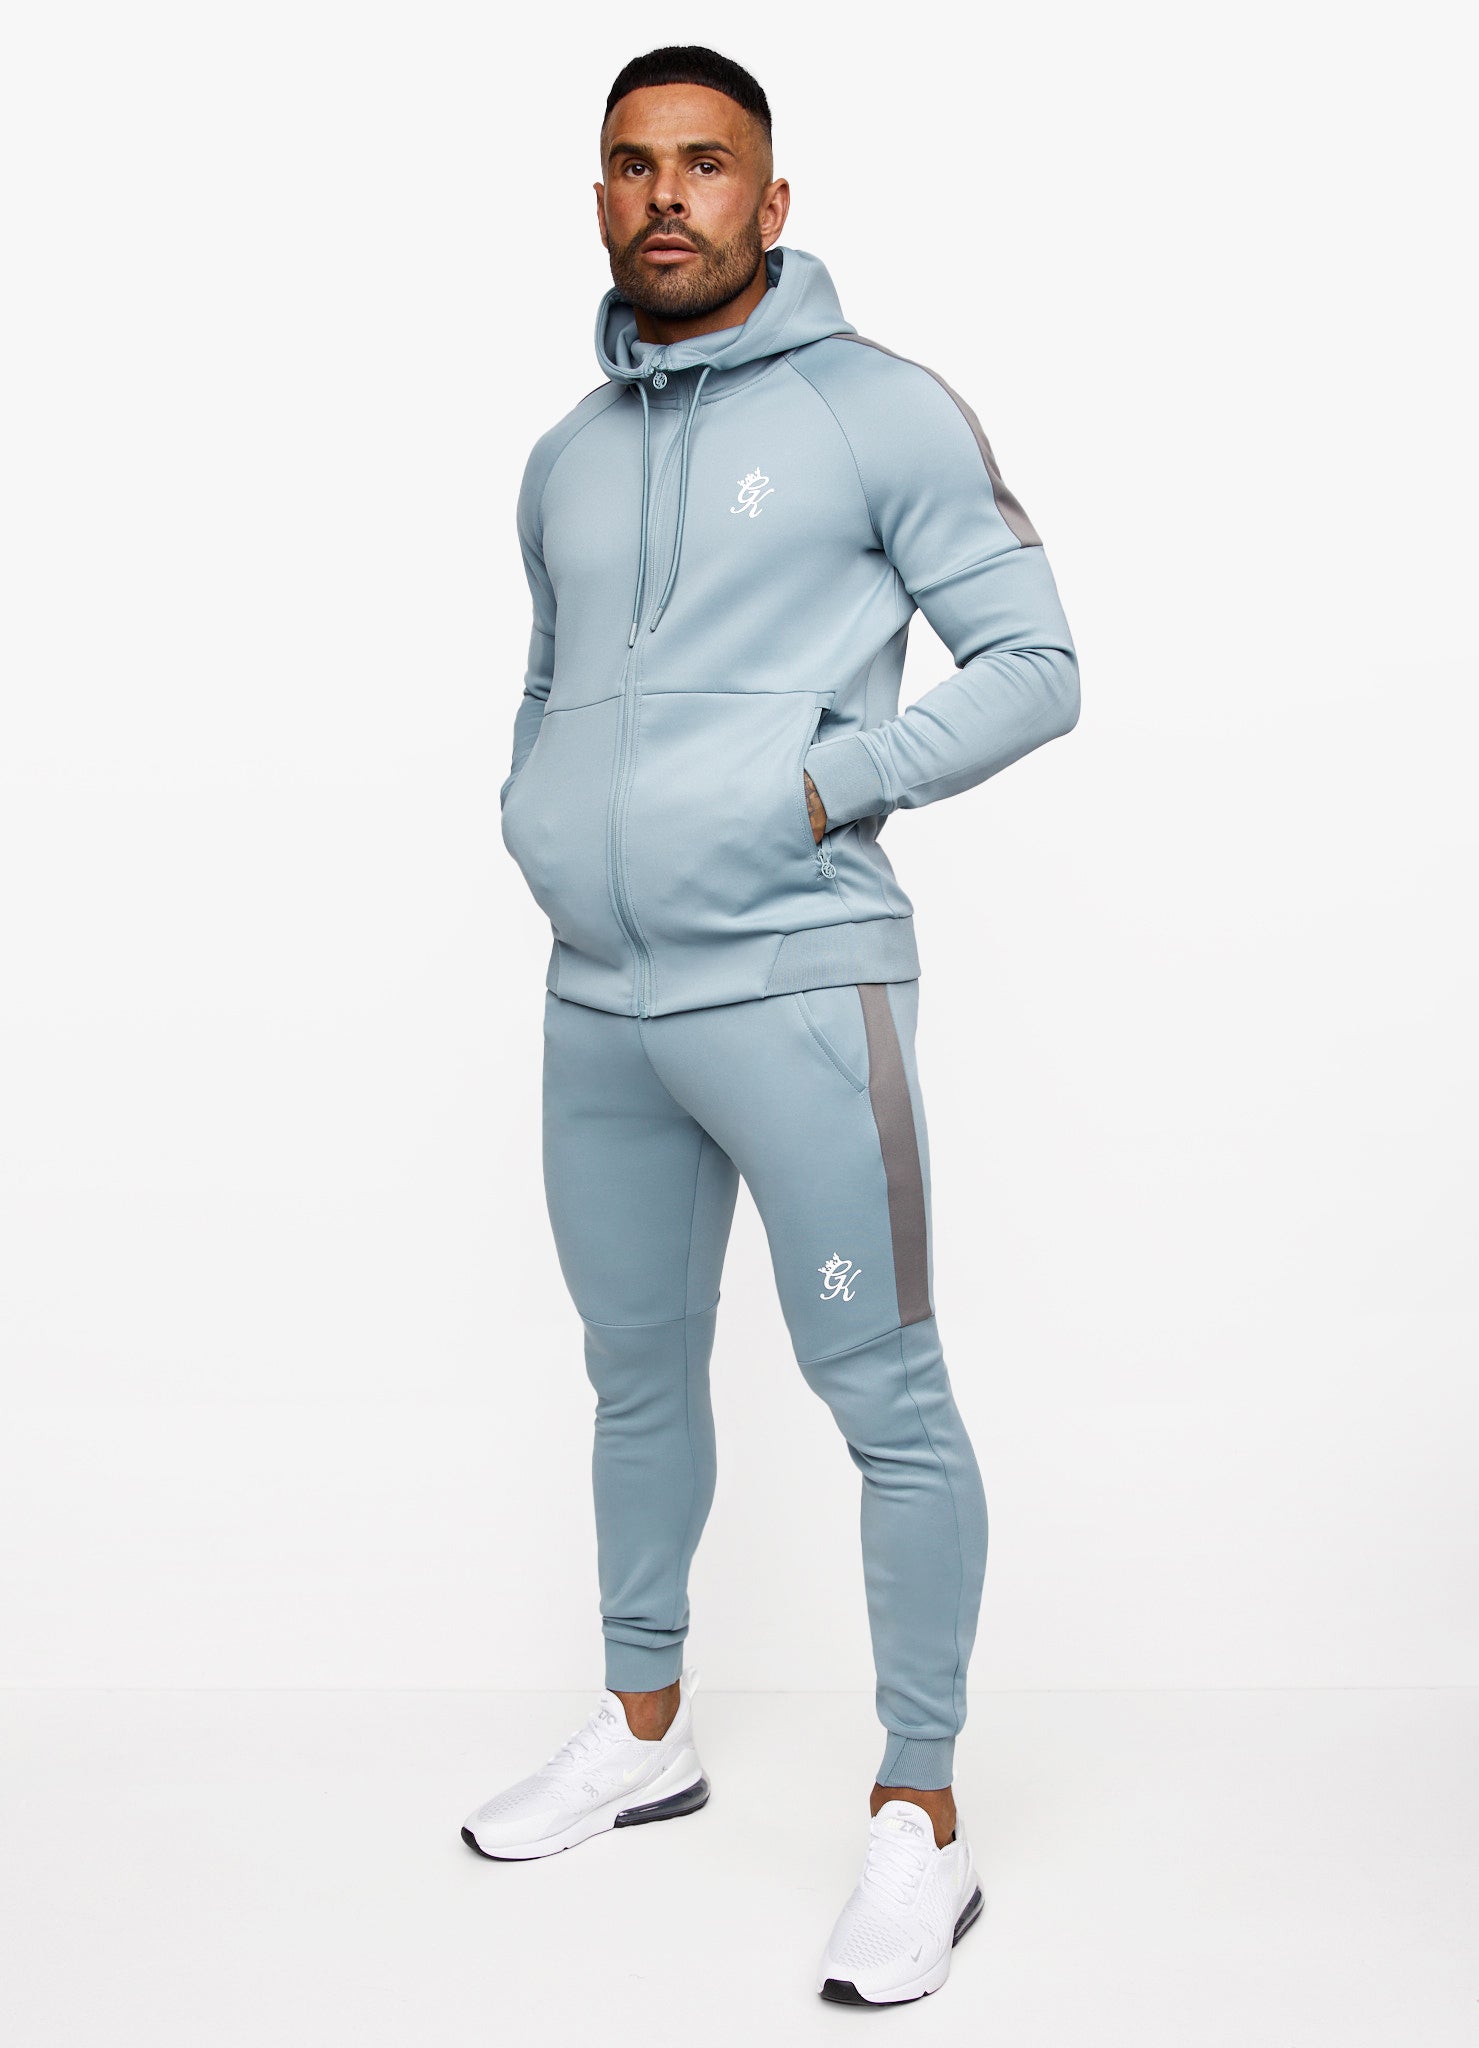 Gym King Tracksuits | Sets, Tops & Bottoms – Tagged 